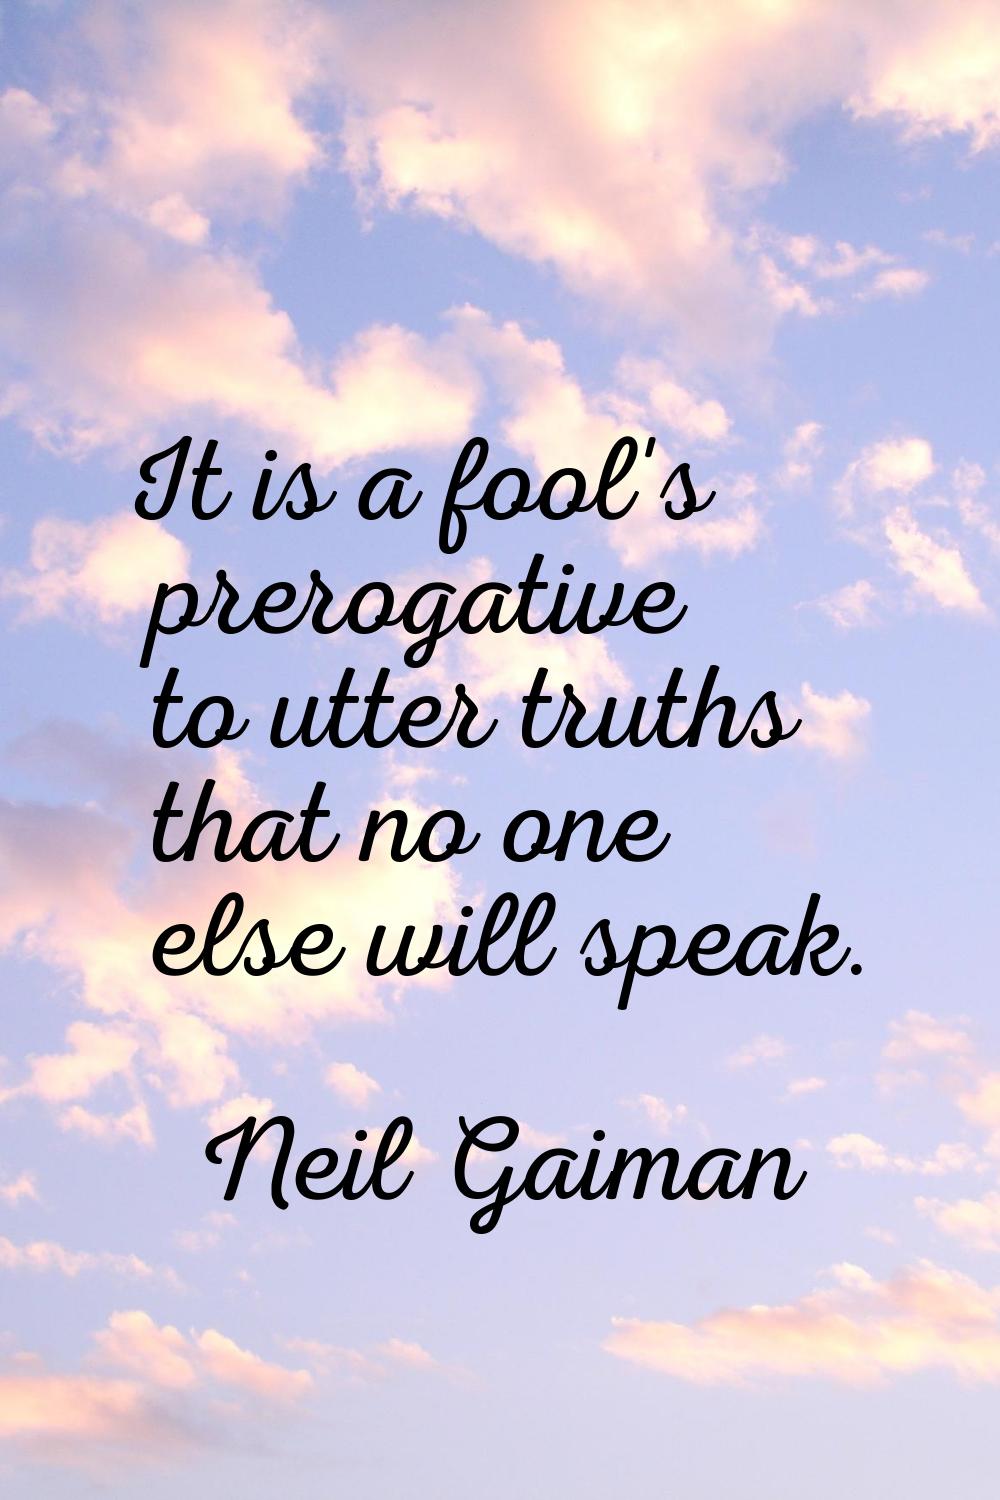 It is a fool's prerogative to utter truths that no one else will speak.